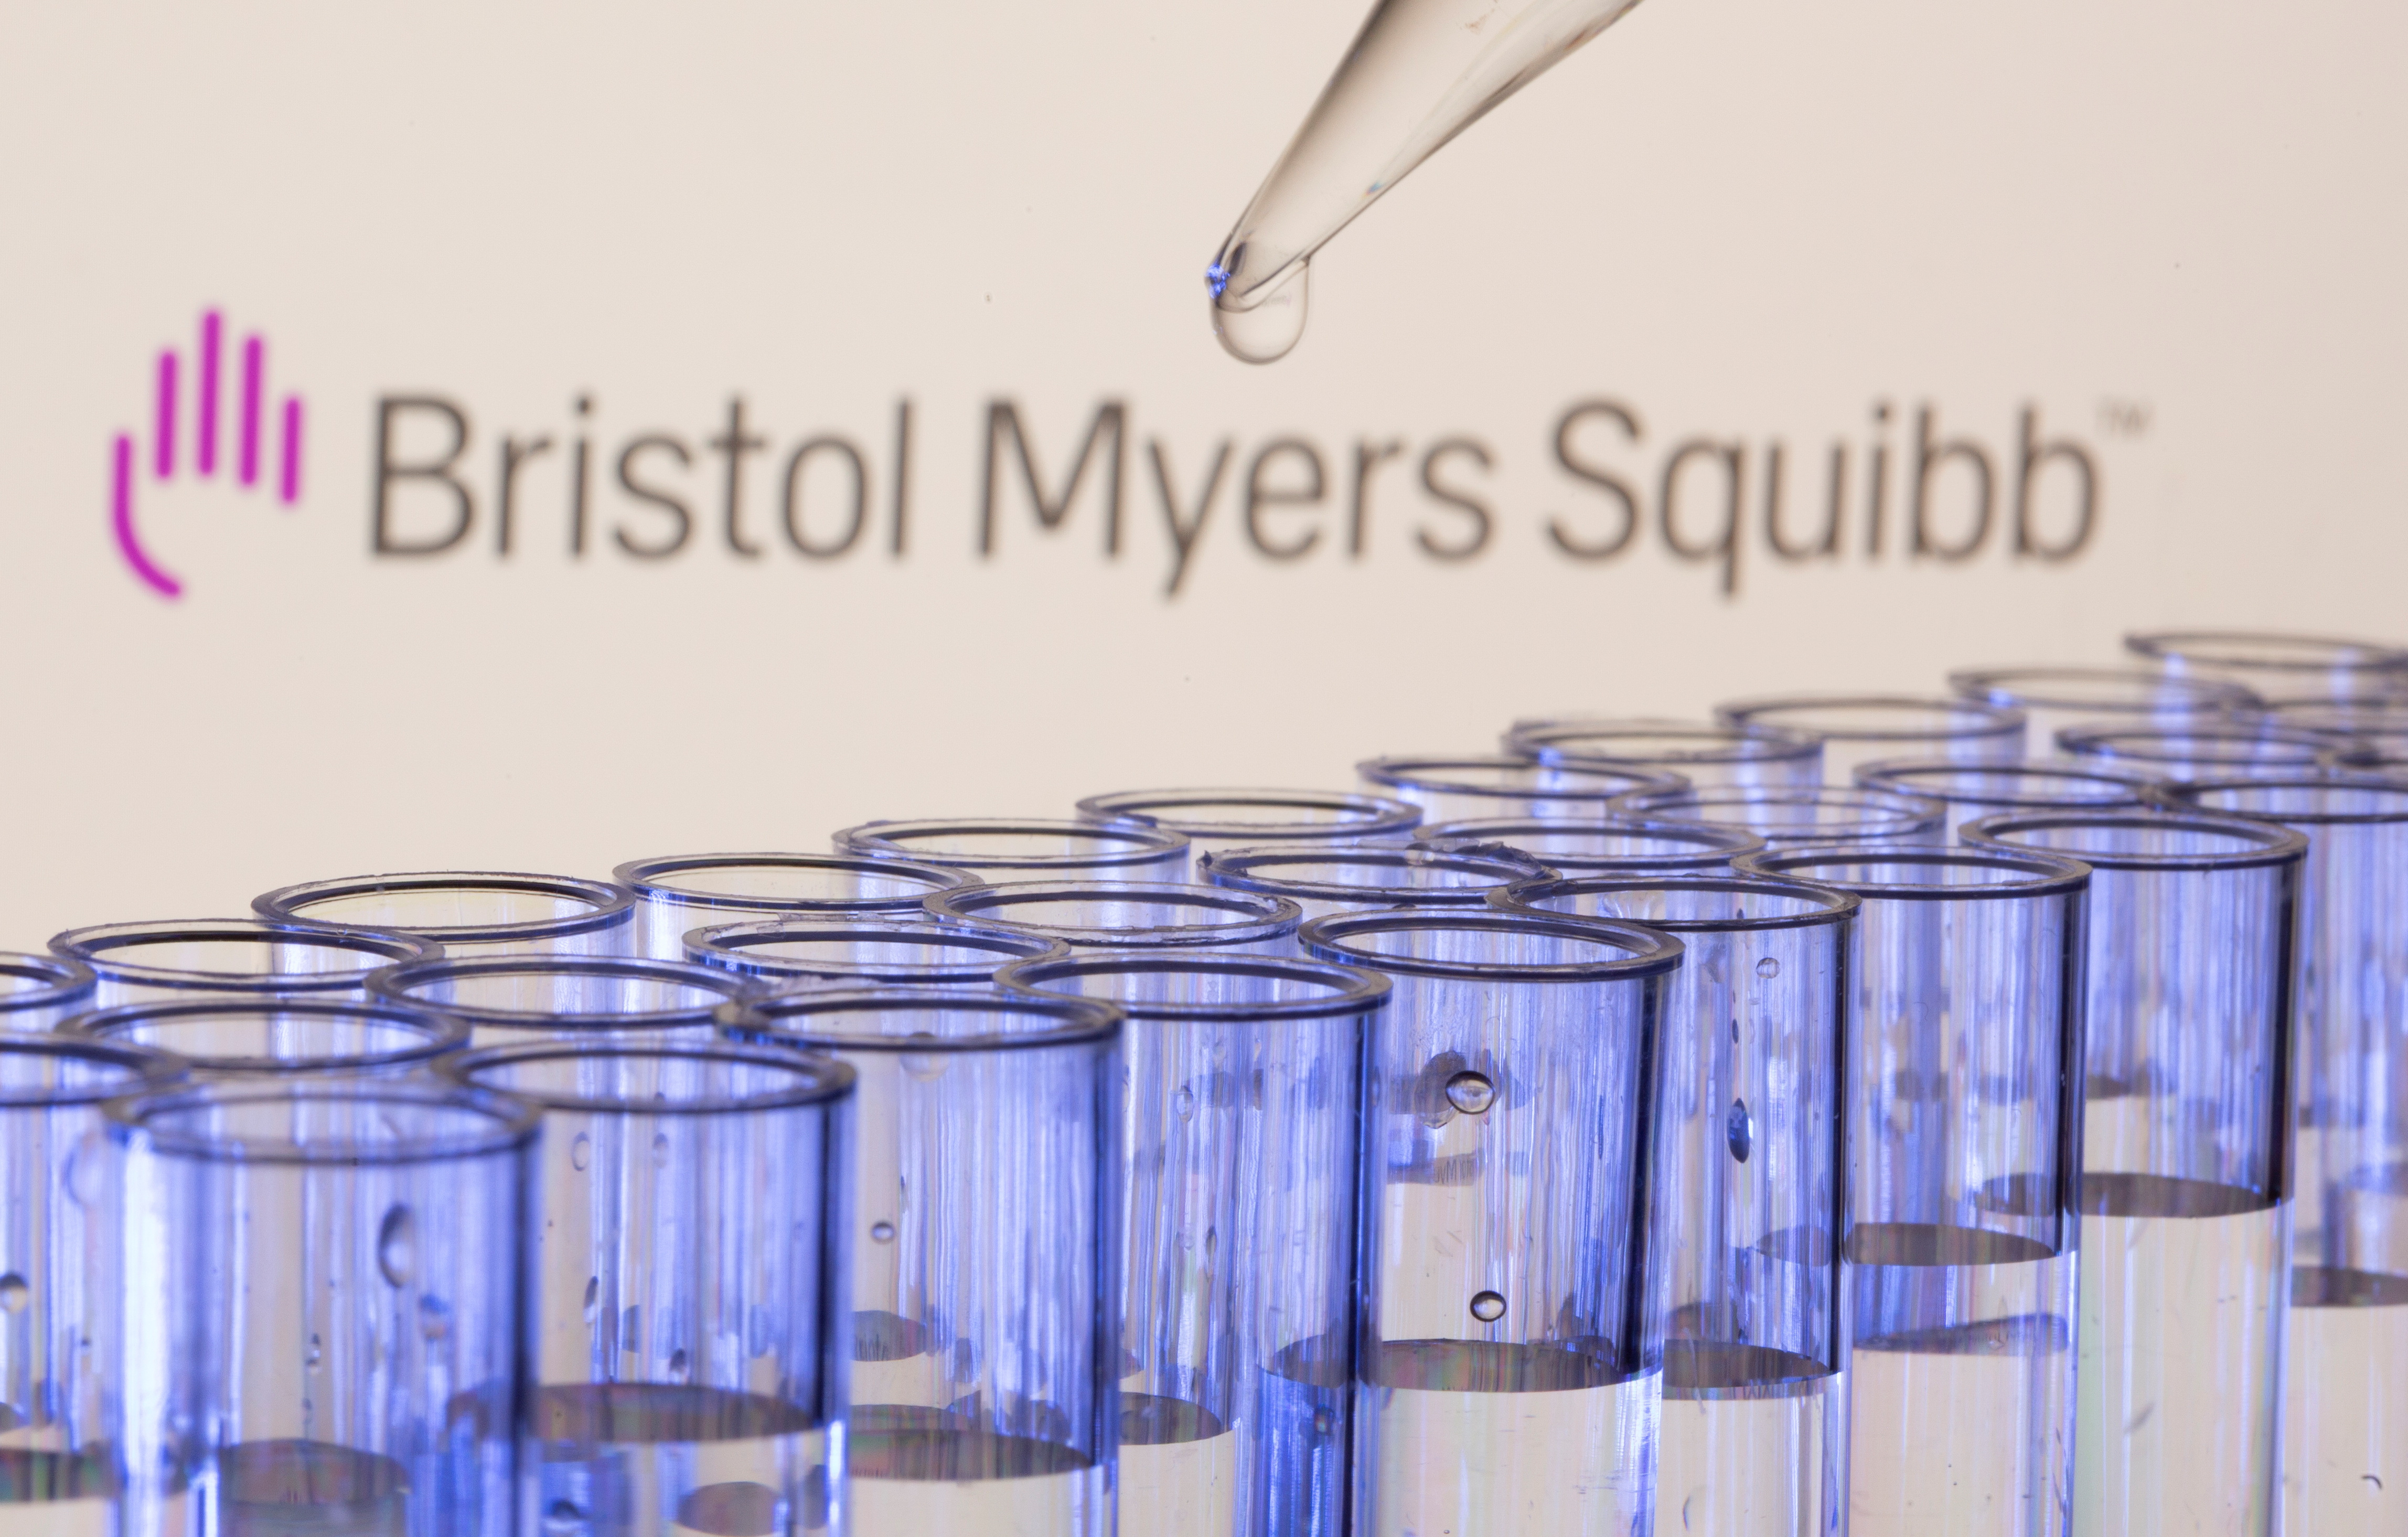 Test tubes are seen in front of a displayed Bristol Myers Squibb logo in this illustration